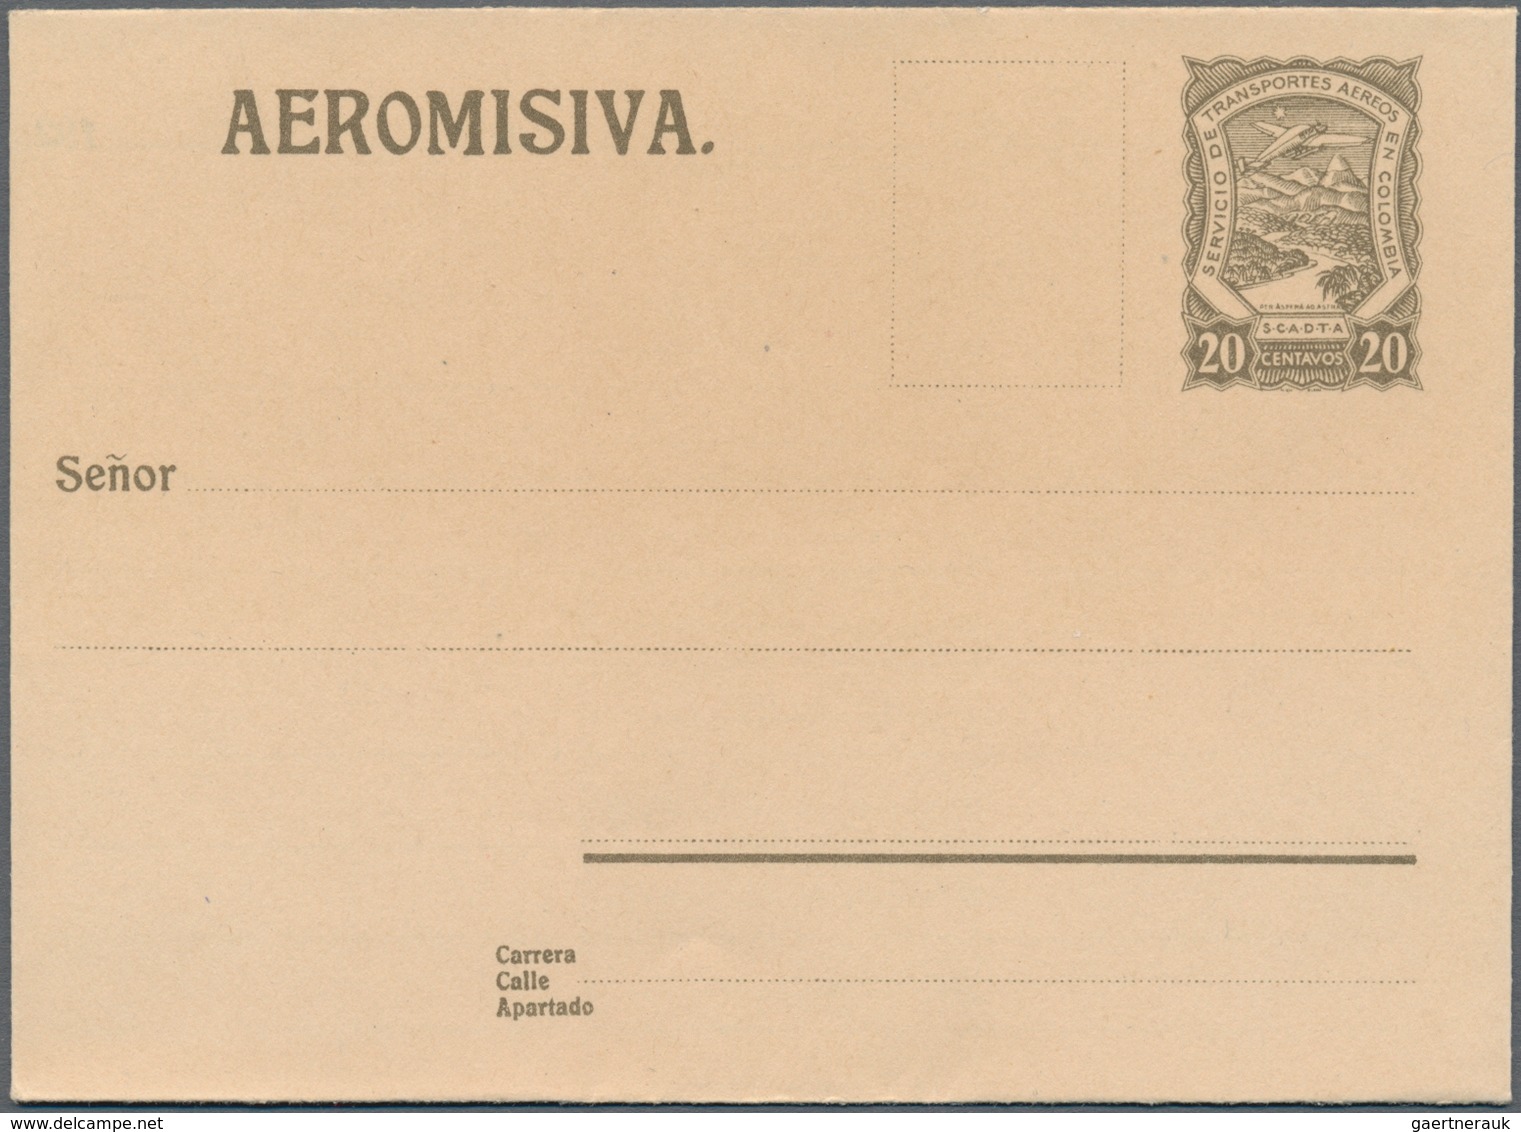 SCADTA - Ausgaben Für Kolumbien: 1923 9 Airletters Different Sizes And Values, One Commercially Used - Colombia